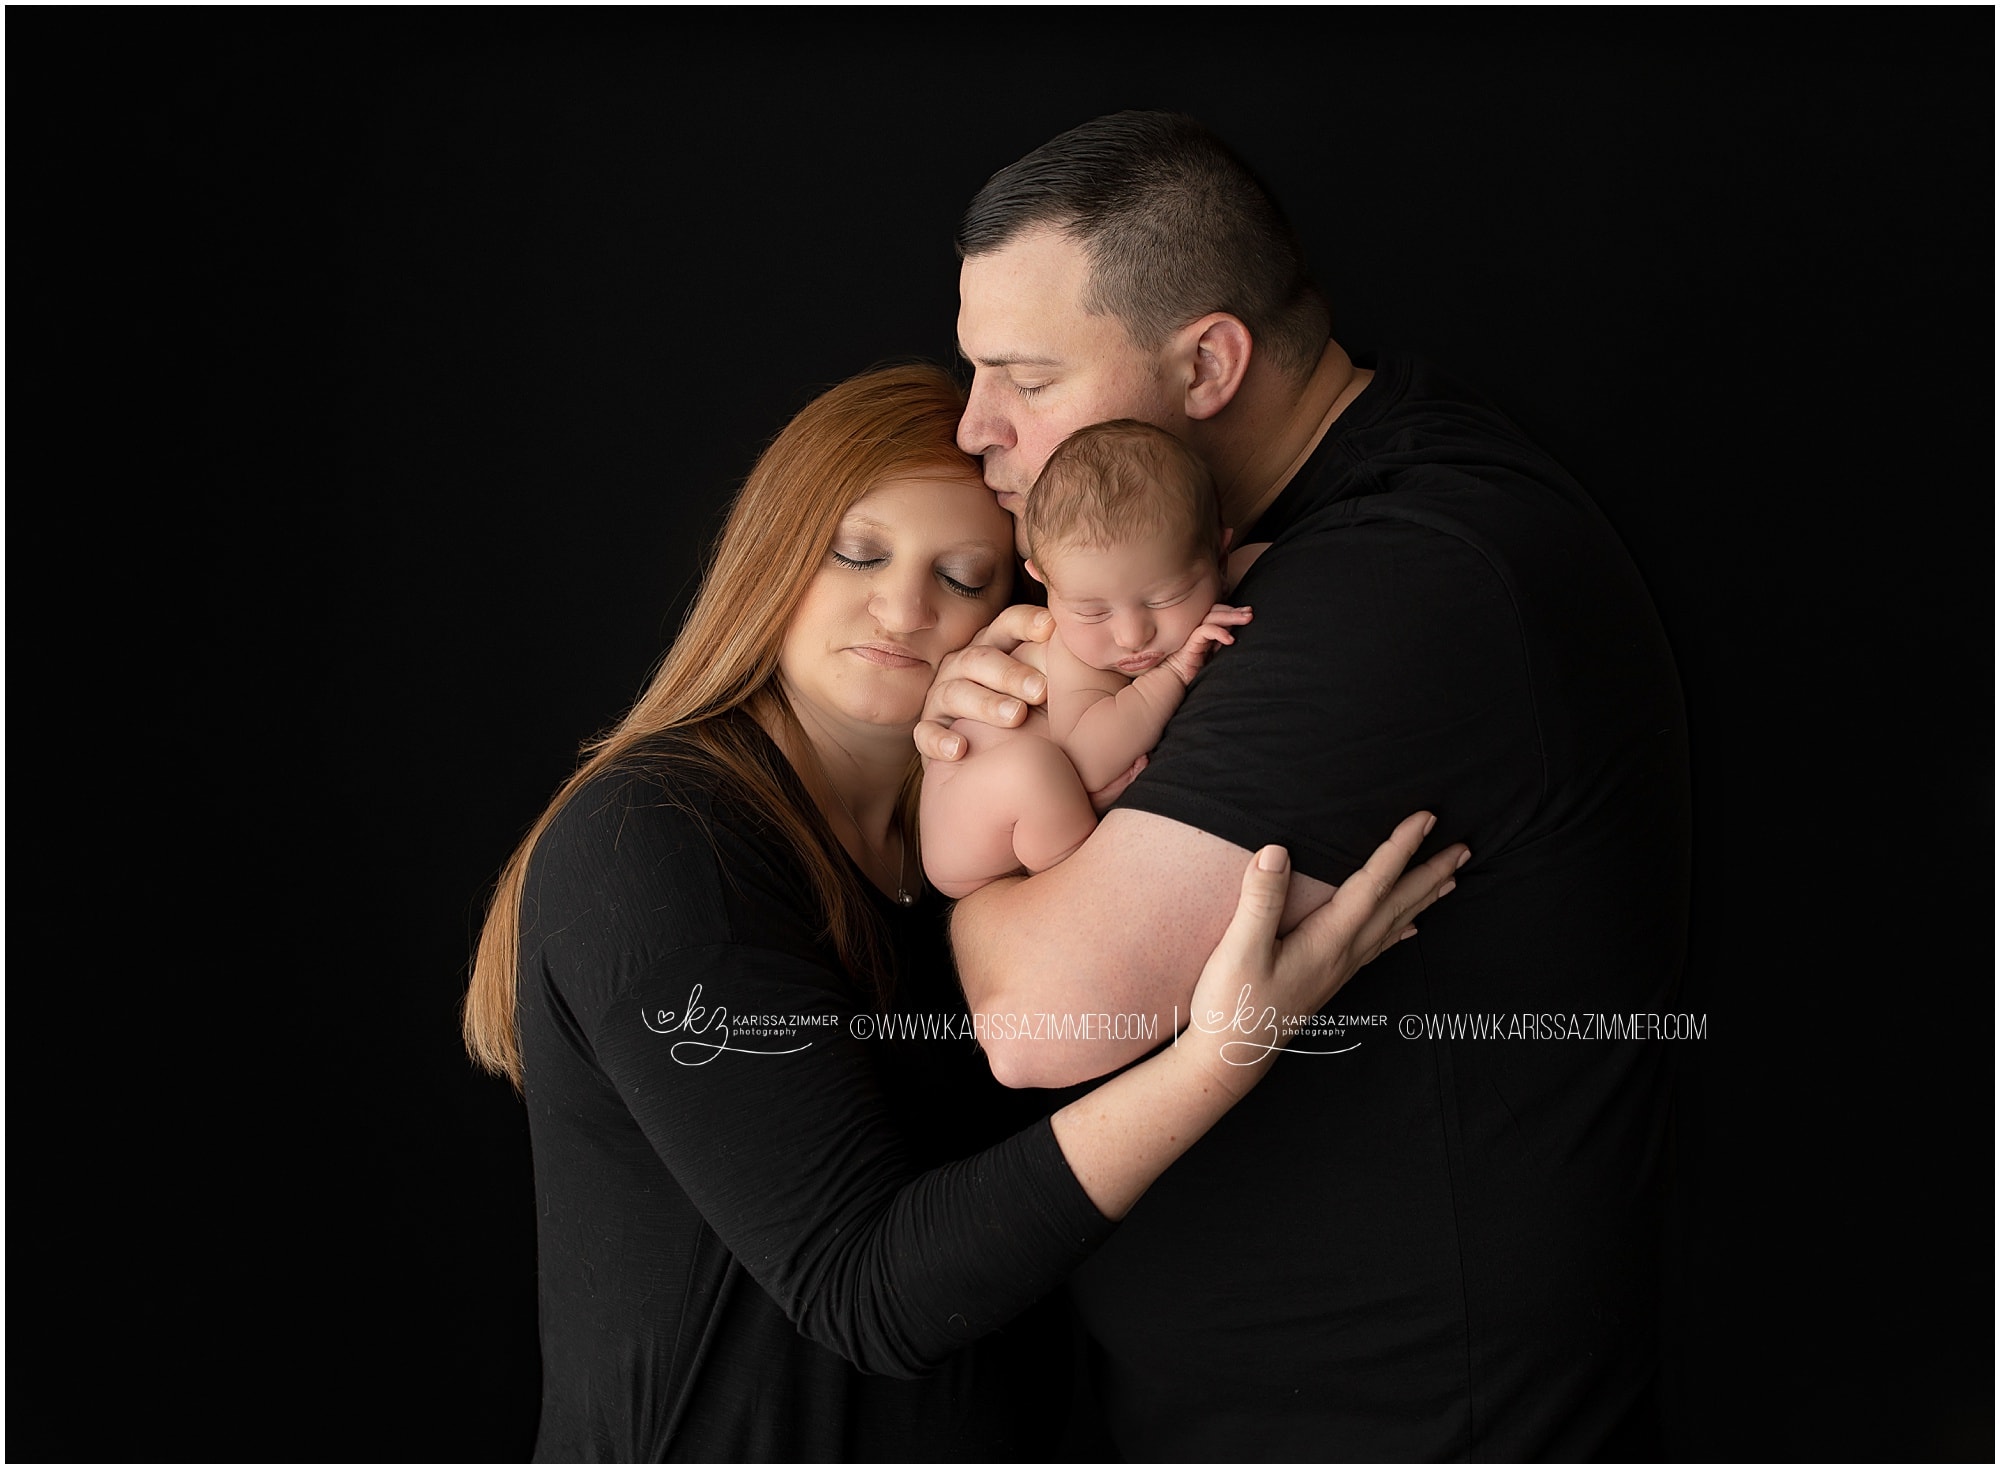 Camp Hill baby photographer captures studio portraits of new parents and their baby boy